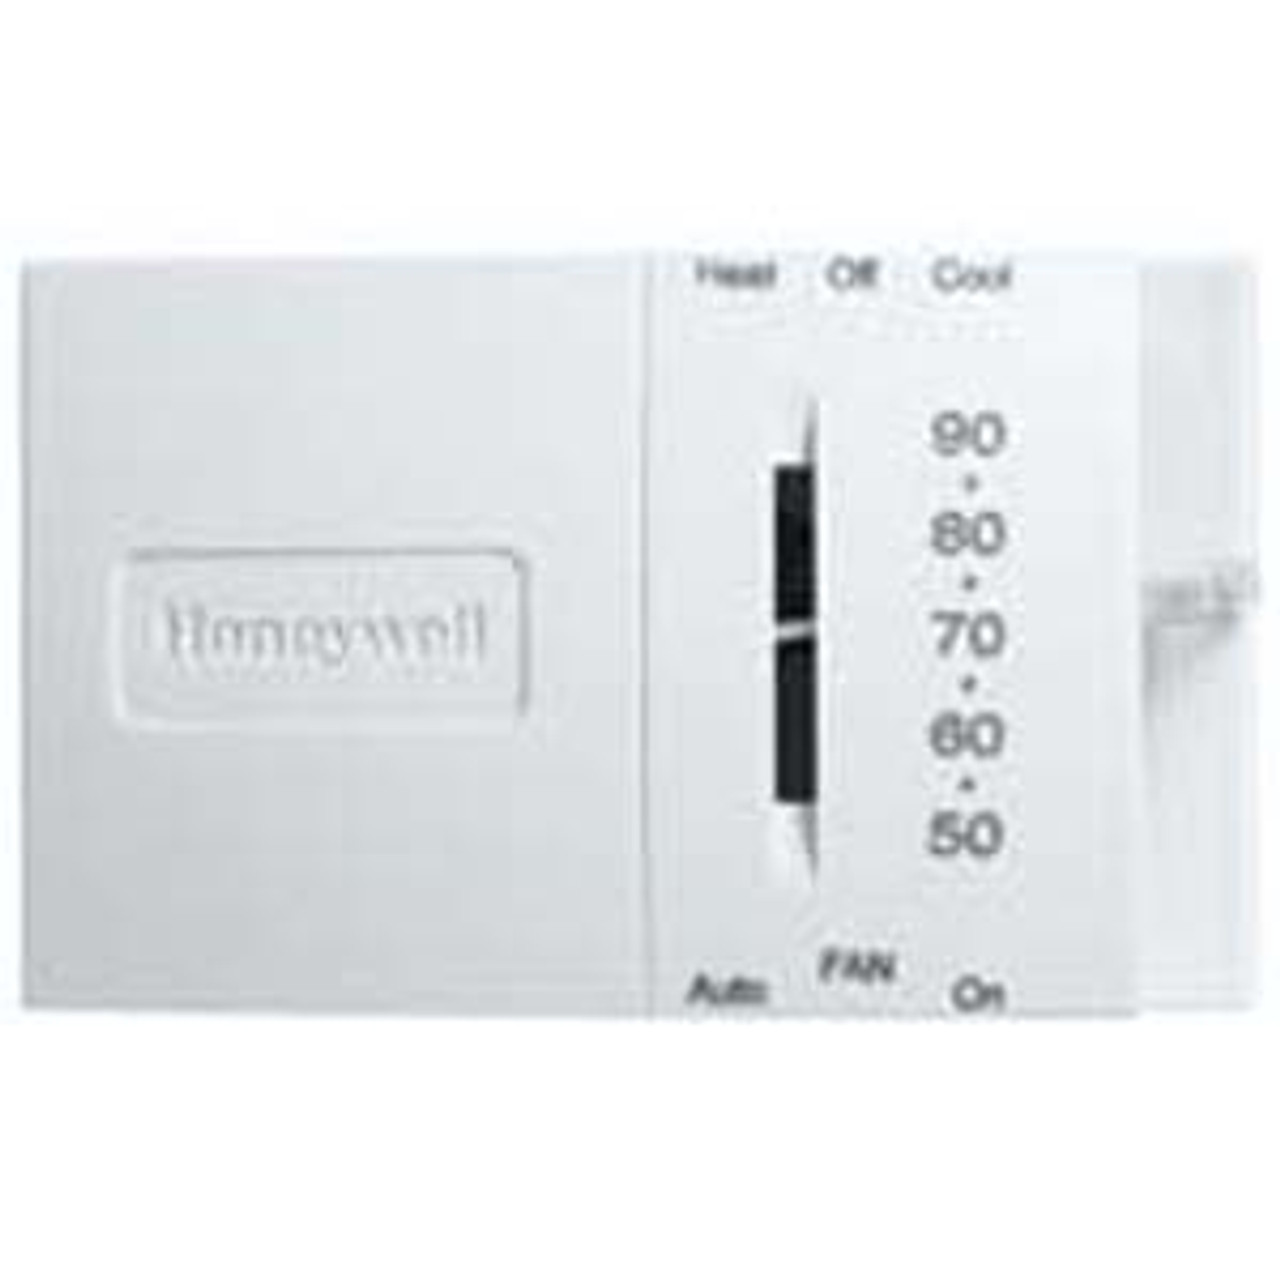 Honeywell T8034N1007 - 1 Heat/ 1 Cool Stage Thermostat